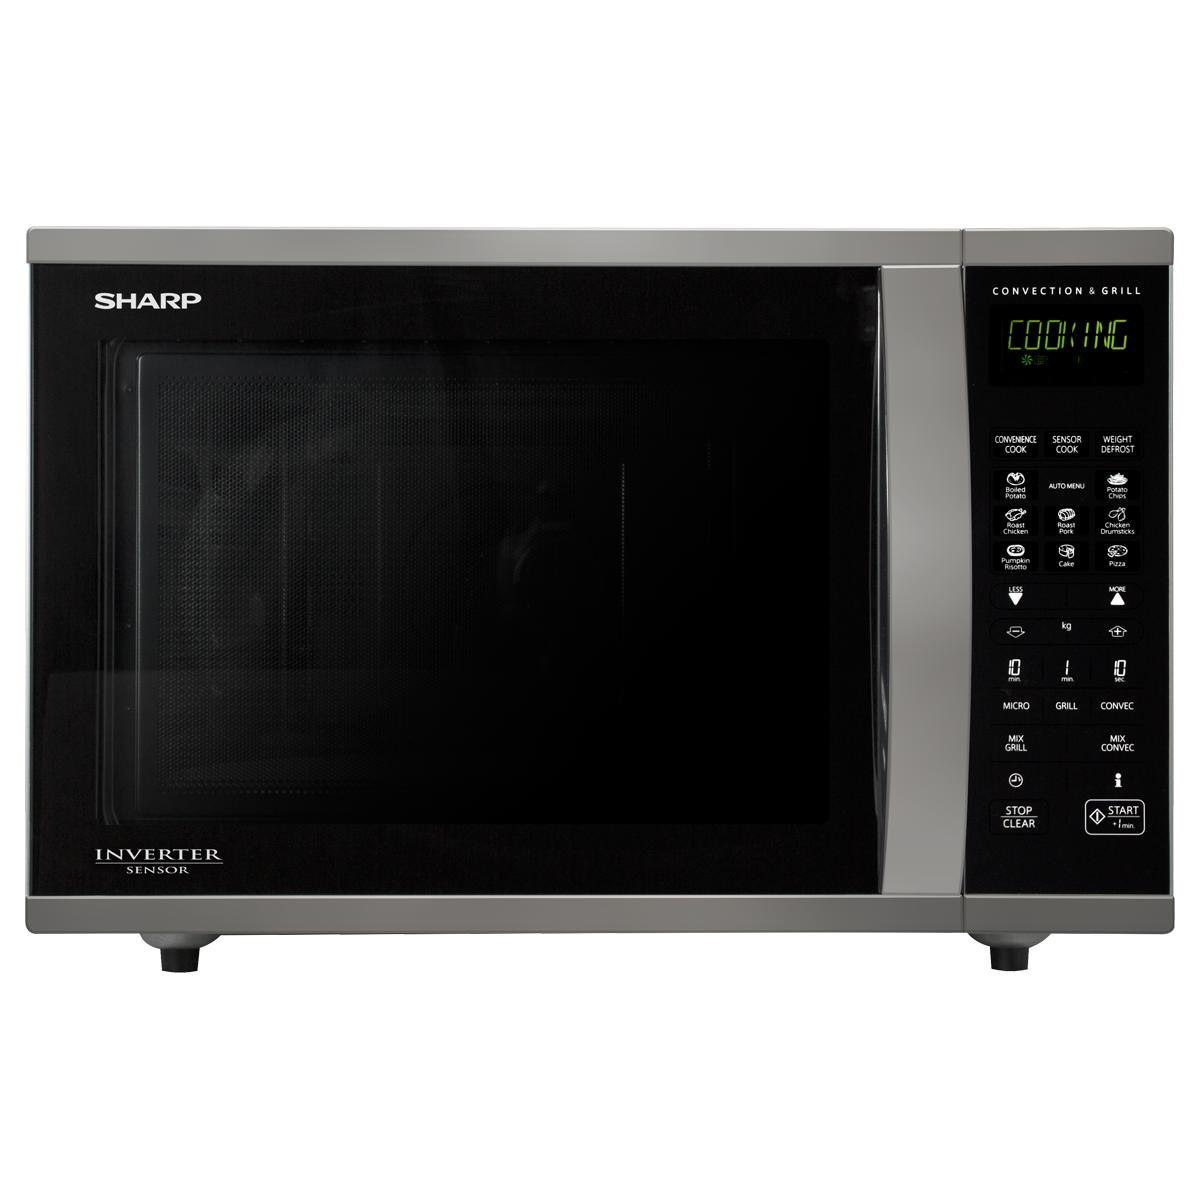 Sharp R995DST 40L Convection Microwave – Stainless Steel